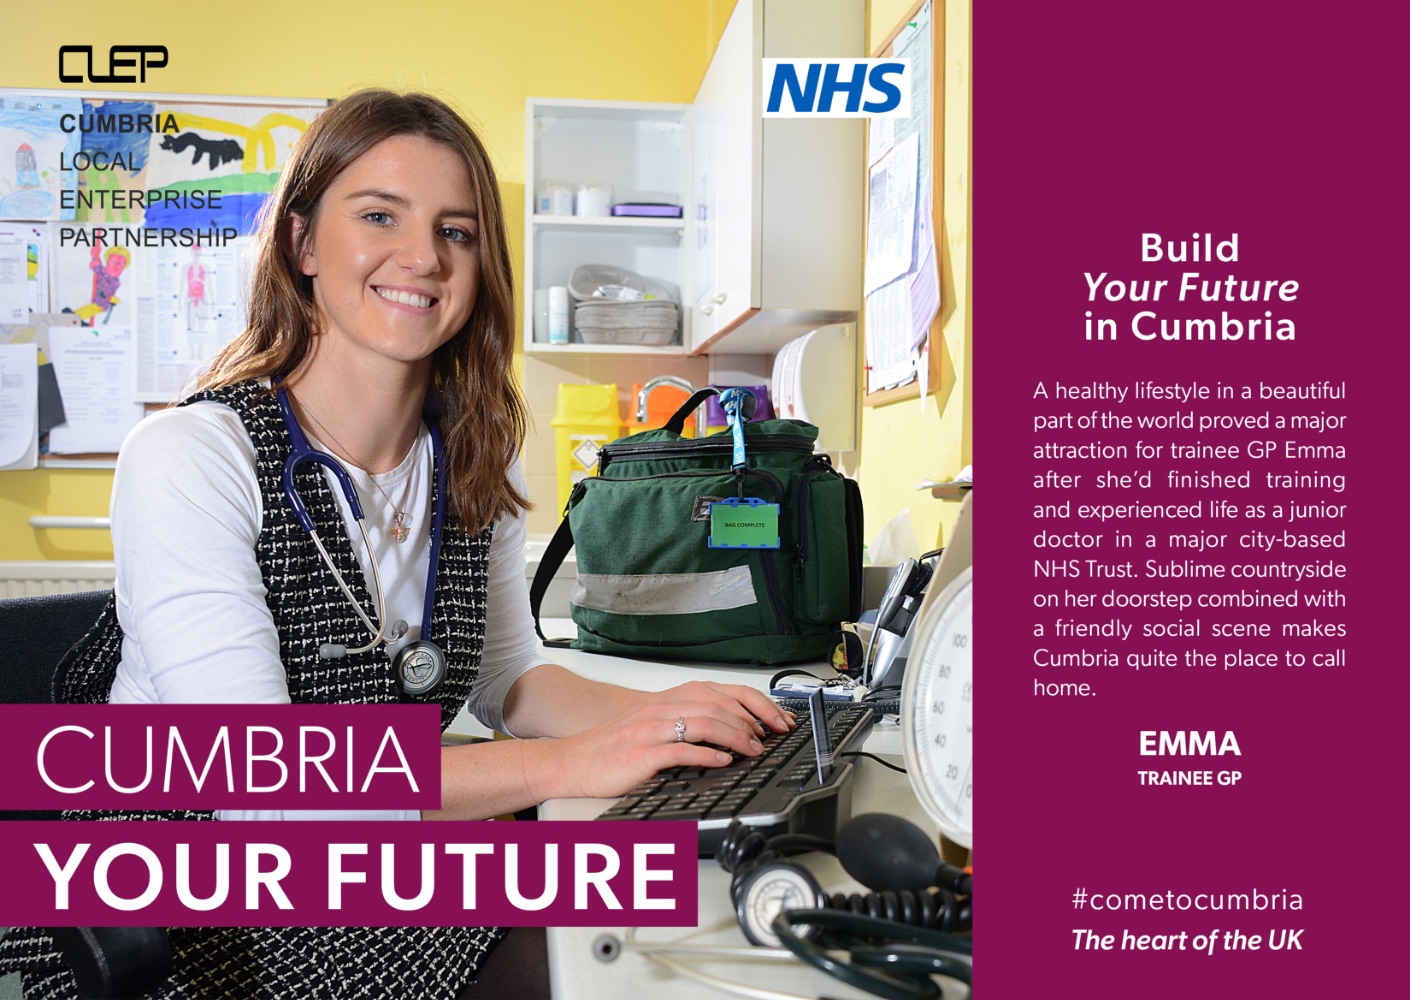 Build Your Future In Cumbria: A healthy lifestyle in a beautiful part of the world proved a major attraction for trainee GP Emma after she'd finished training and experienced life in a major city-based NHS trust. Sublime countryside on her doorstep combined with a friendly social scene makes Cumbria quite the place to call home. (Photo: Emma, trainee GP).